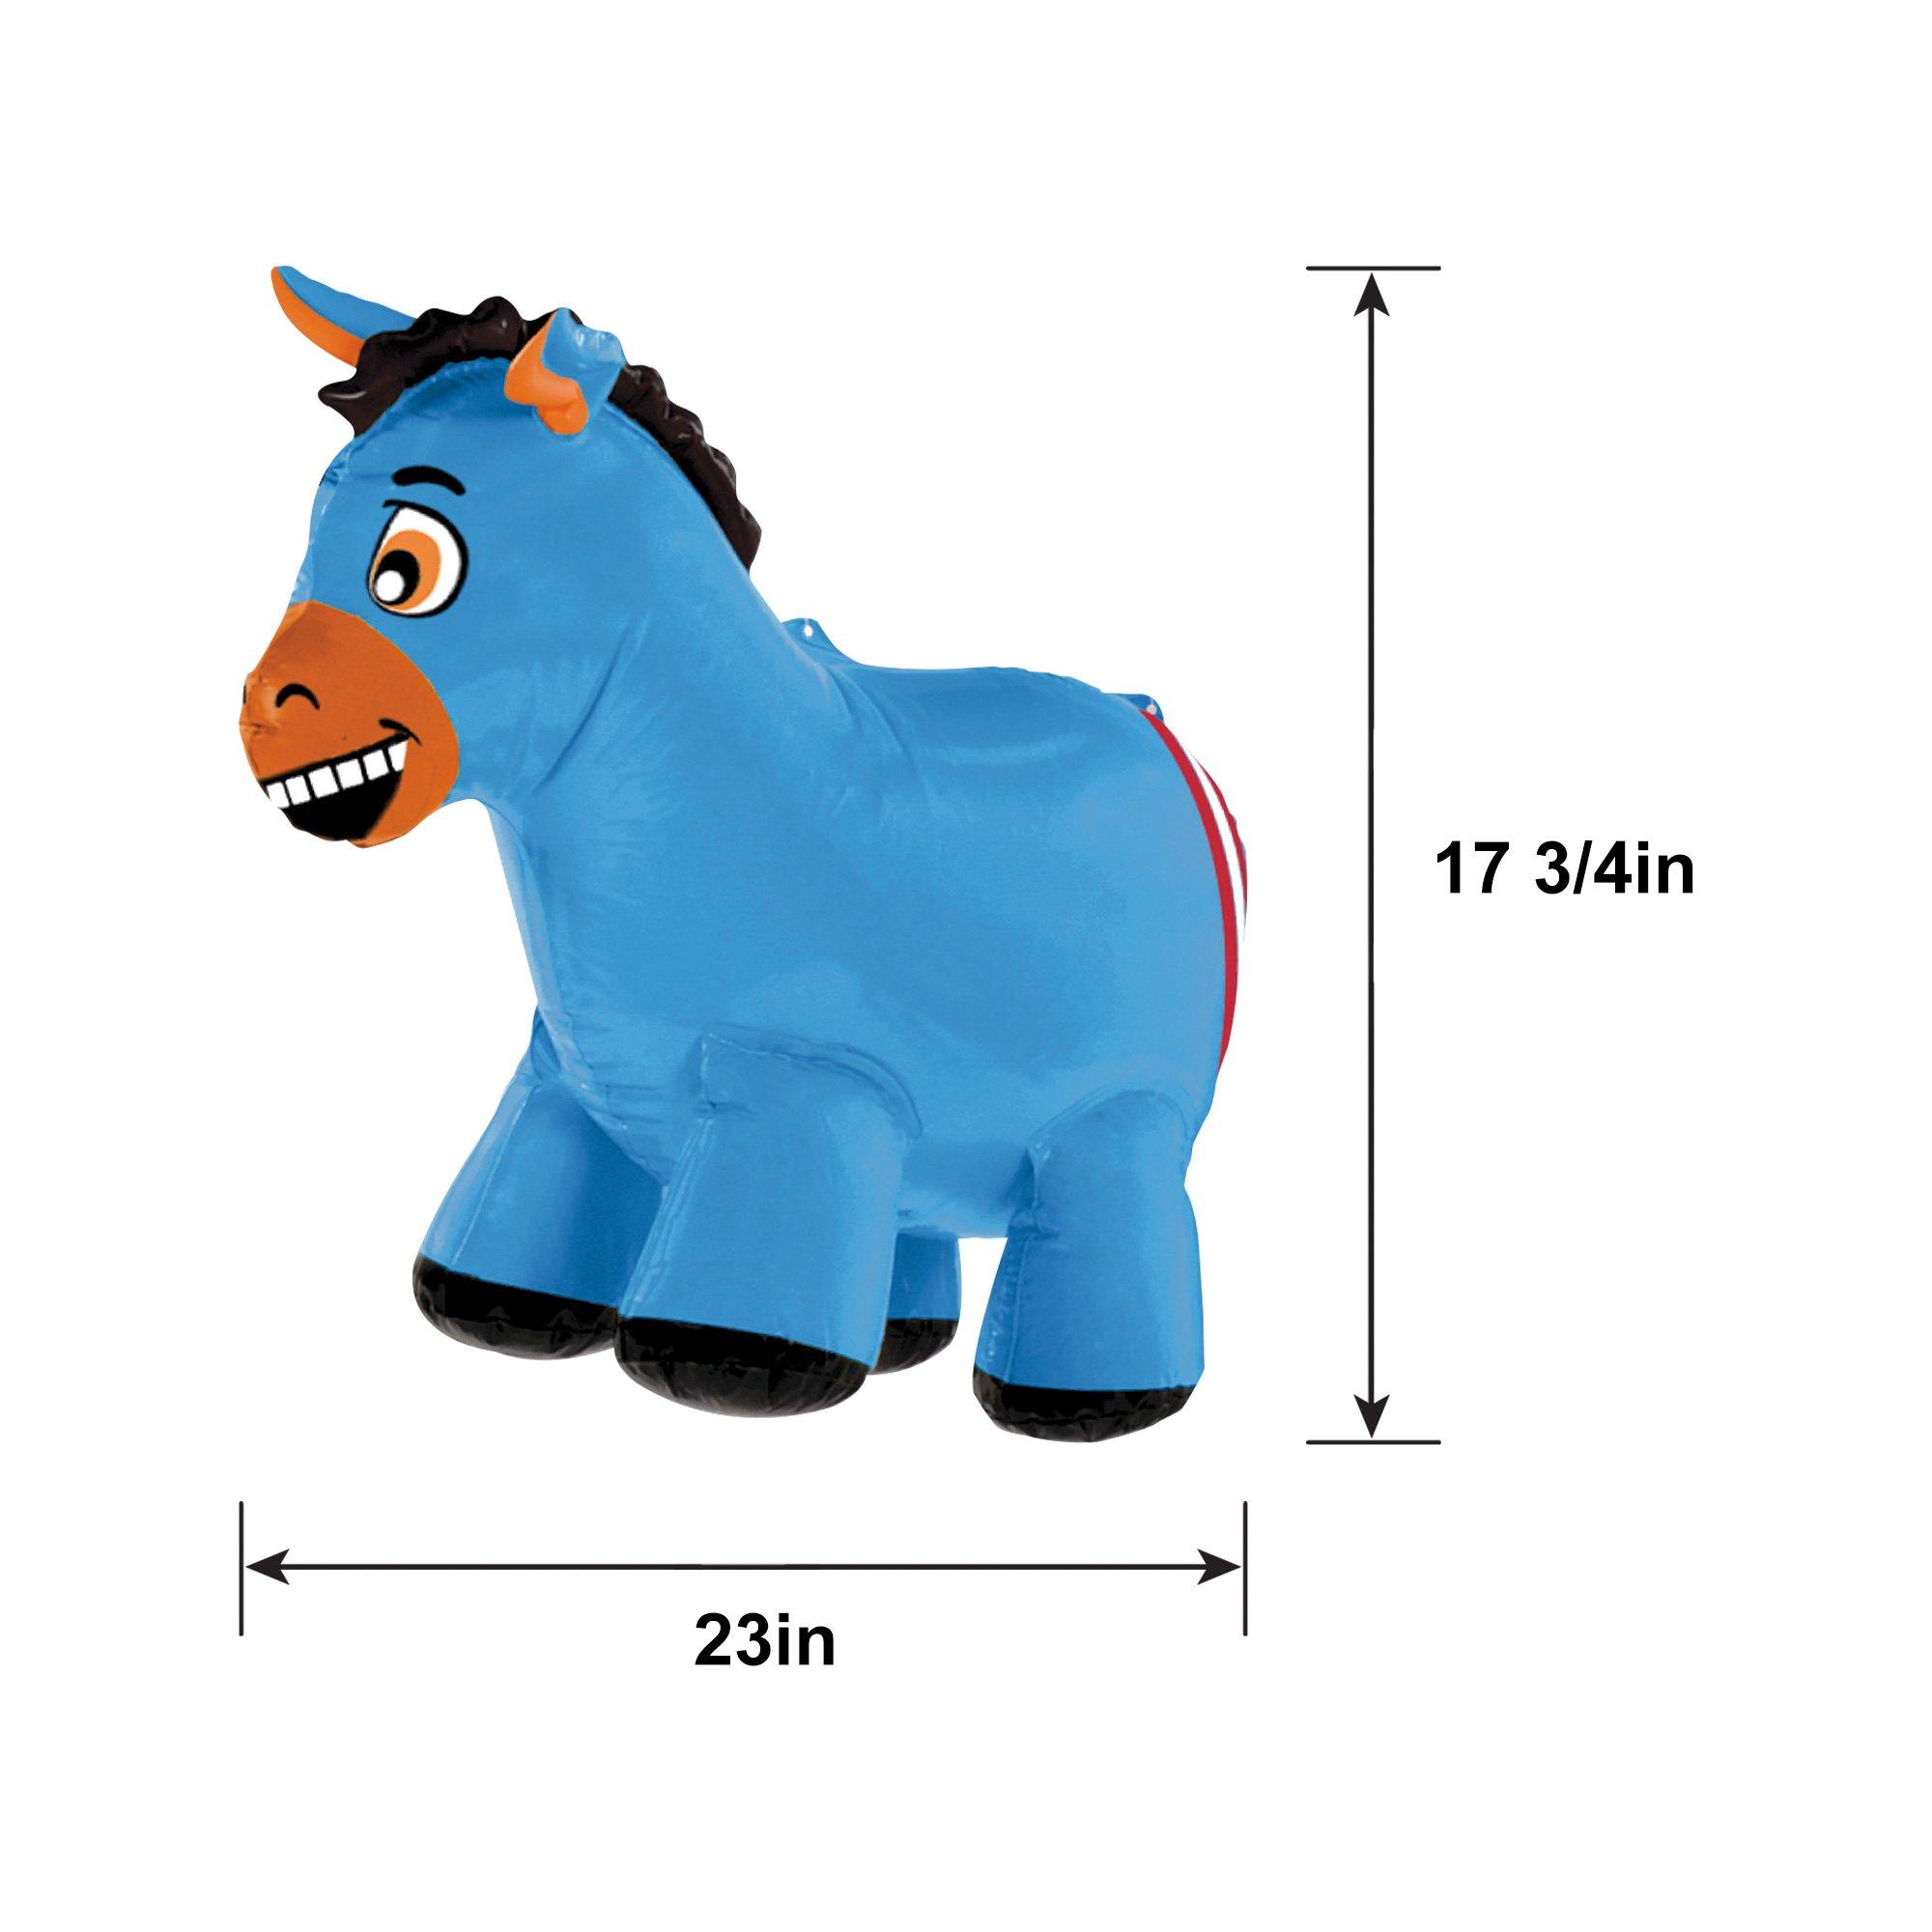 Inflatable Pin the Tail on the Donkey Game